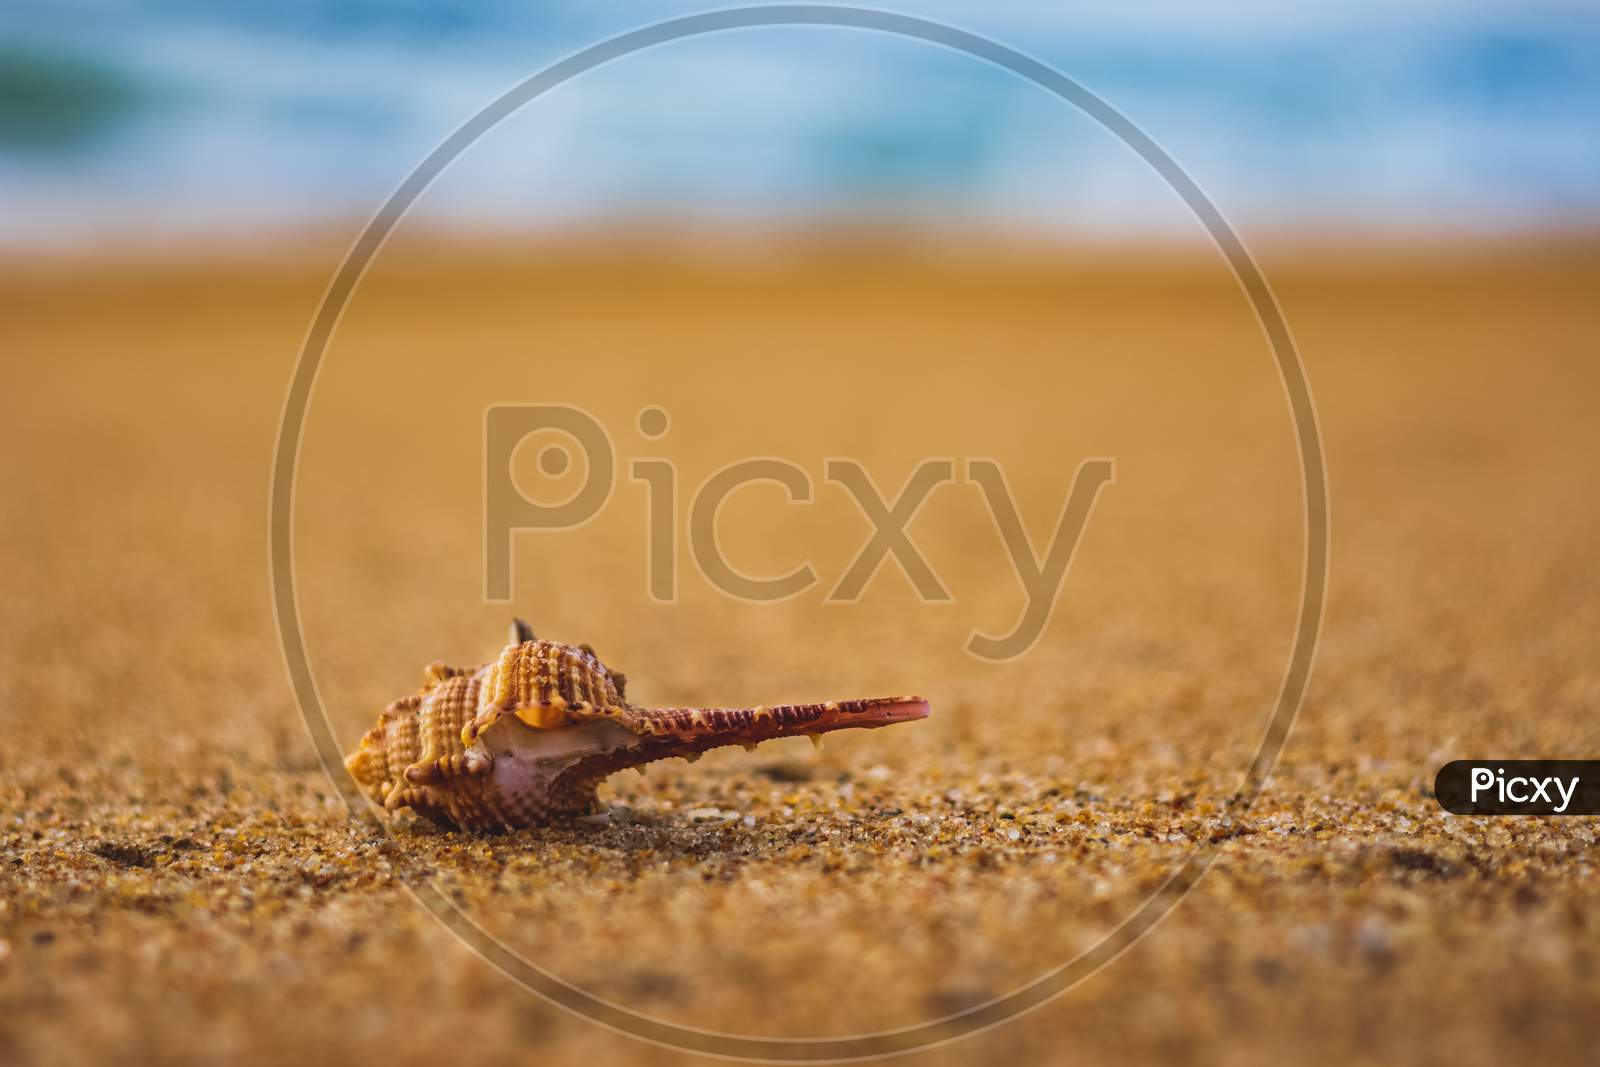 Seashell In The Sand On The Background Of Beach And Sea - (Shallow Dof). Beach With Conch Seashell Under Blue Sky At Sunrise. Single Shell On Beach Seascape.